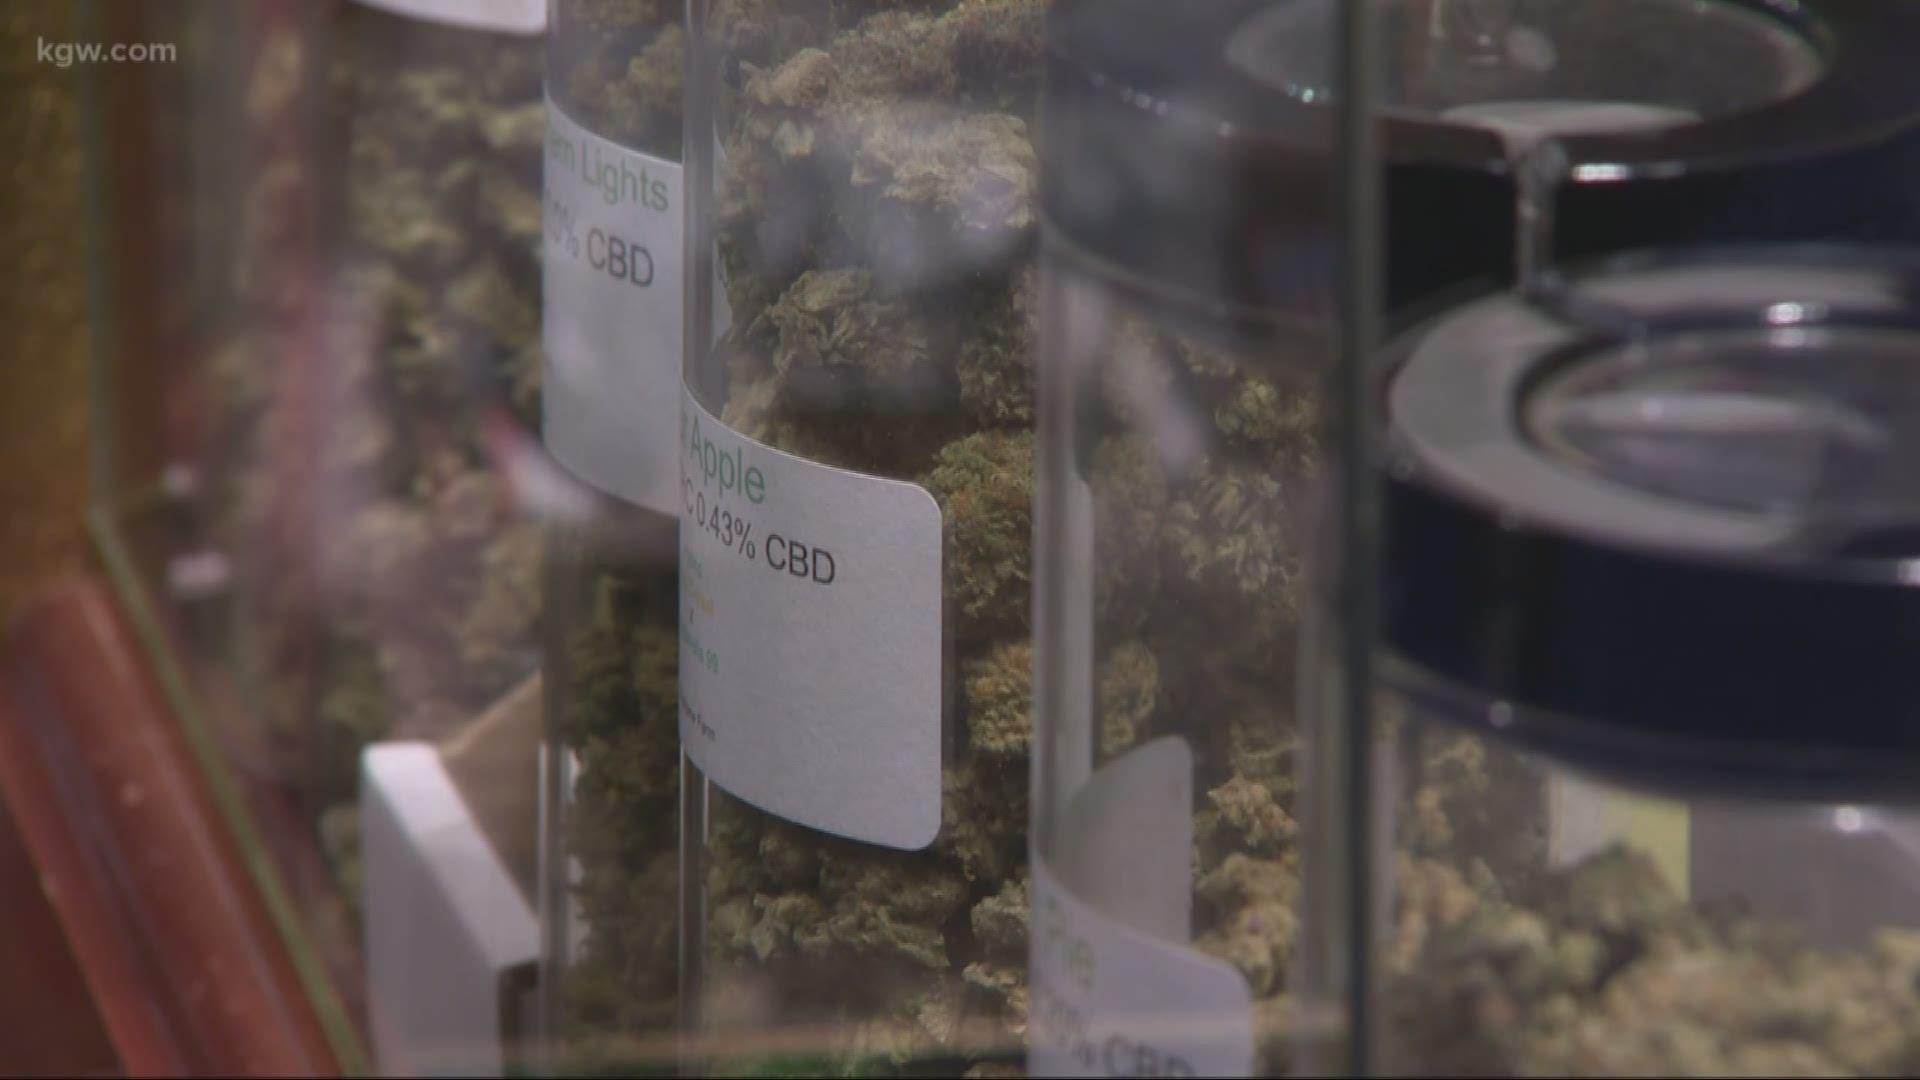 Women have played a key role in the booming business of cannabis in Oregon. The number of women in executive roles in the state is higher than the national average. But the number is in a steady decline: https://on.kgw.com/2GzwAUQ